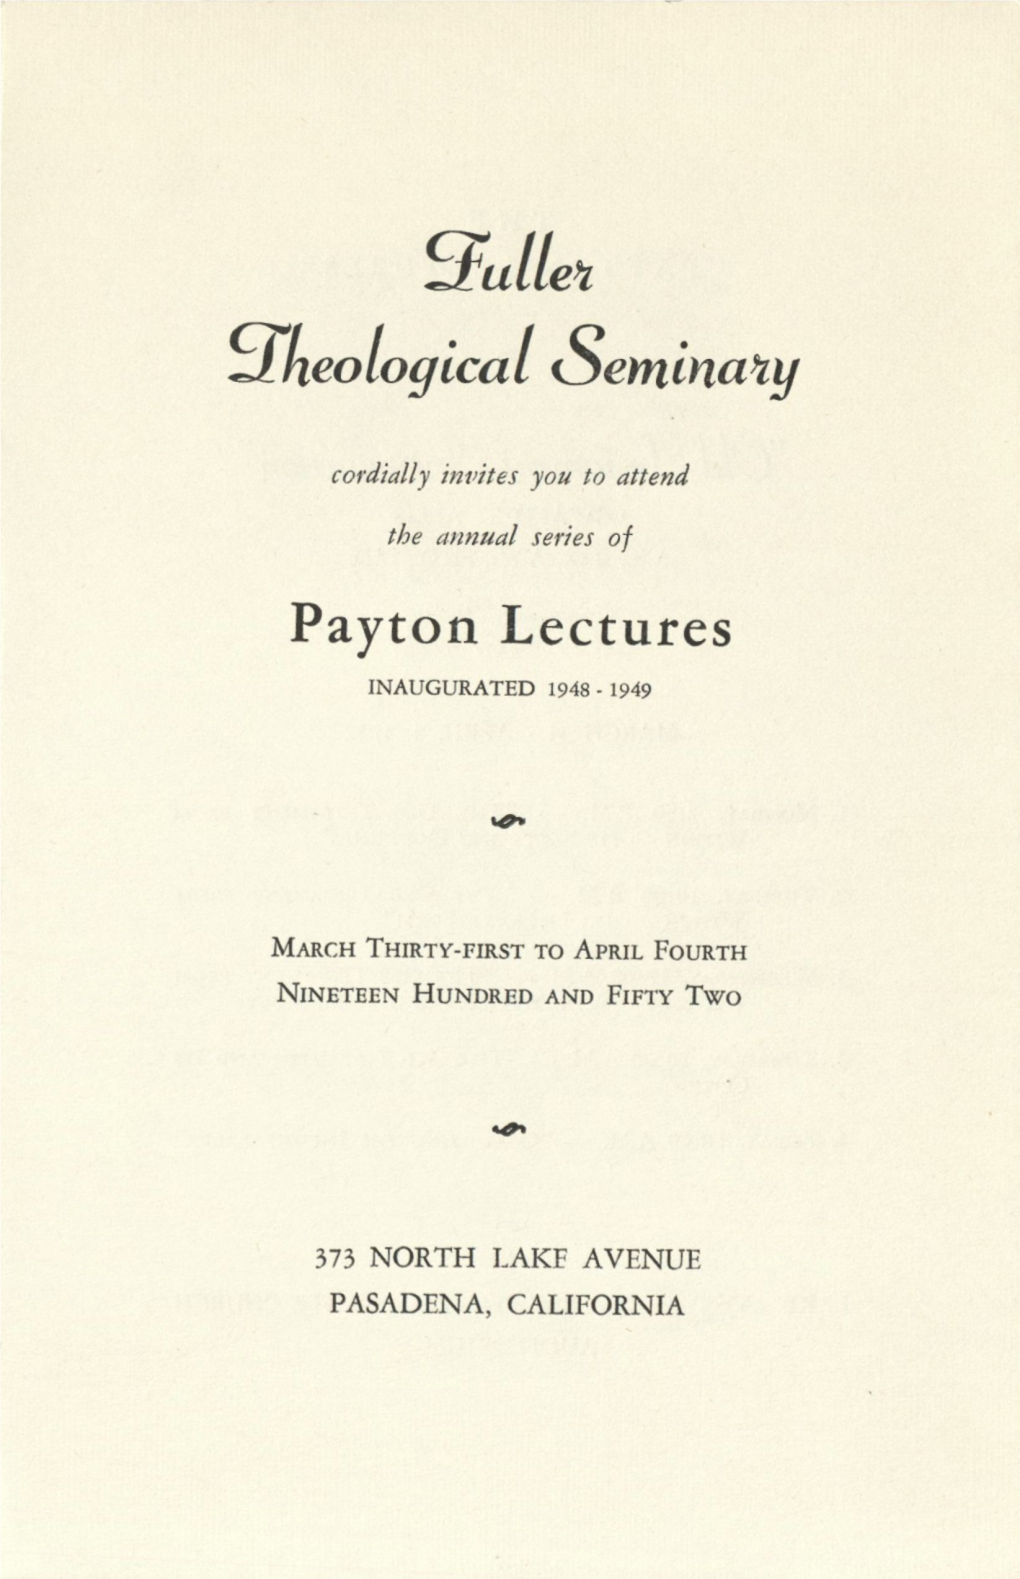 1952 Payton Lectures: Old Testament Introduction